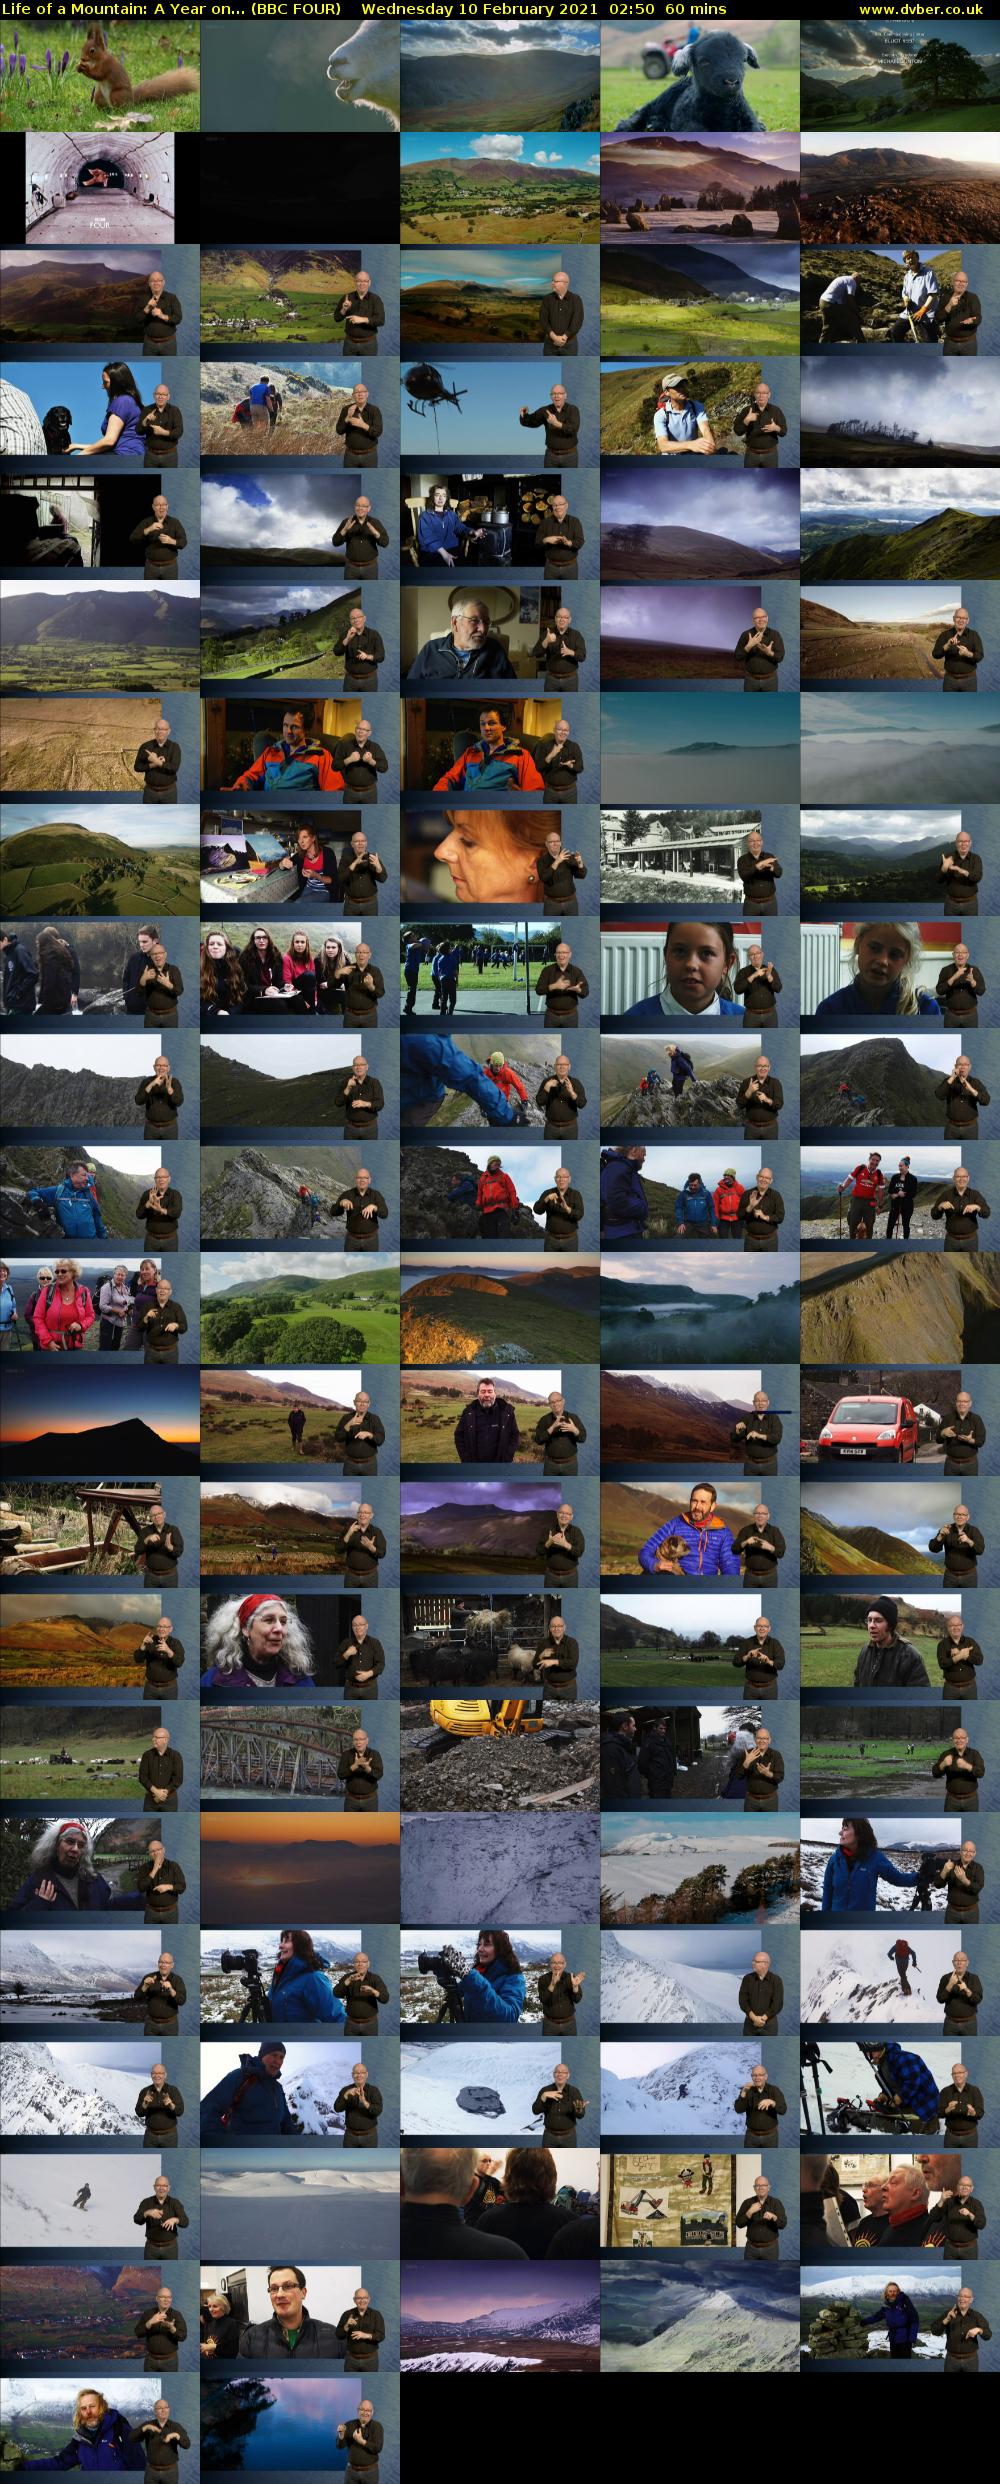 Life of a Mountain: A Year on... (BBC FOUR) Wednesday 10 February 2021 02:50 - 03:50